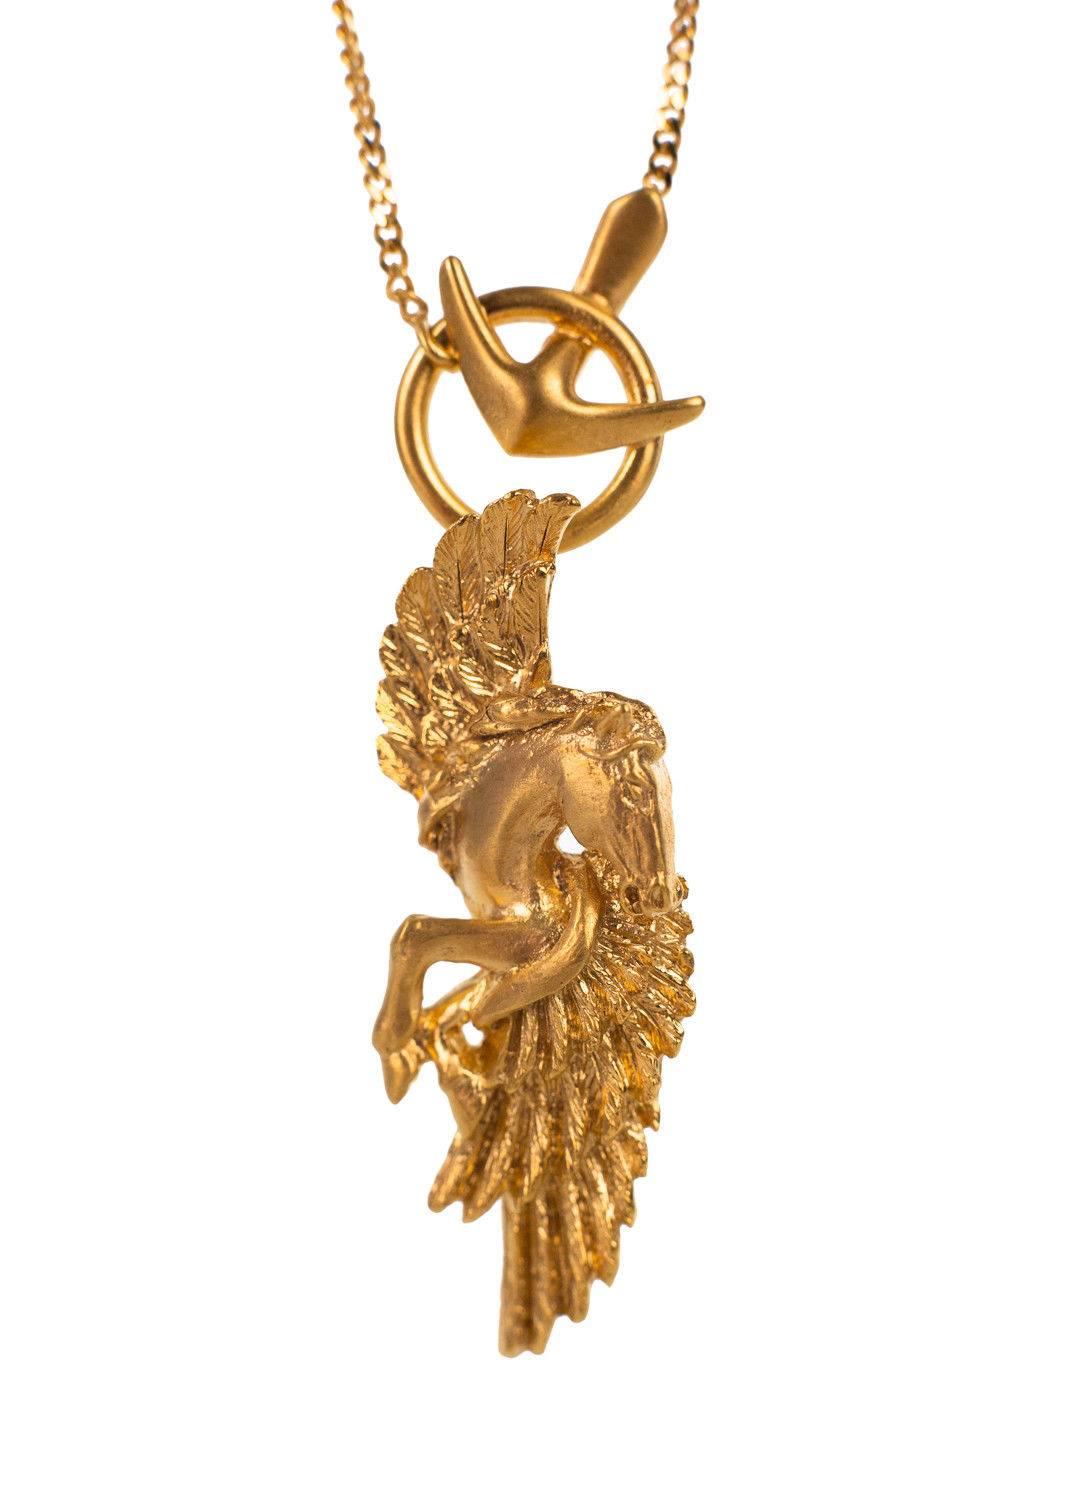 Brand New with Original Tags

Retails in Stores and Online $1180

Roberto Cavallis Floral Gold Pegasus Wings Necklace is the perfect piece to start the spring summer season with. This gold toned beauty a clean and simple gold chains and the ideal